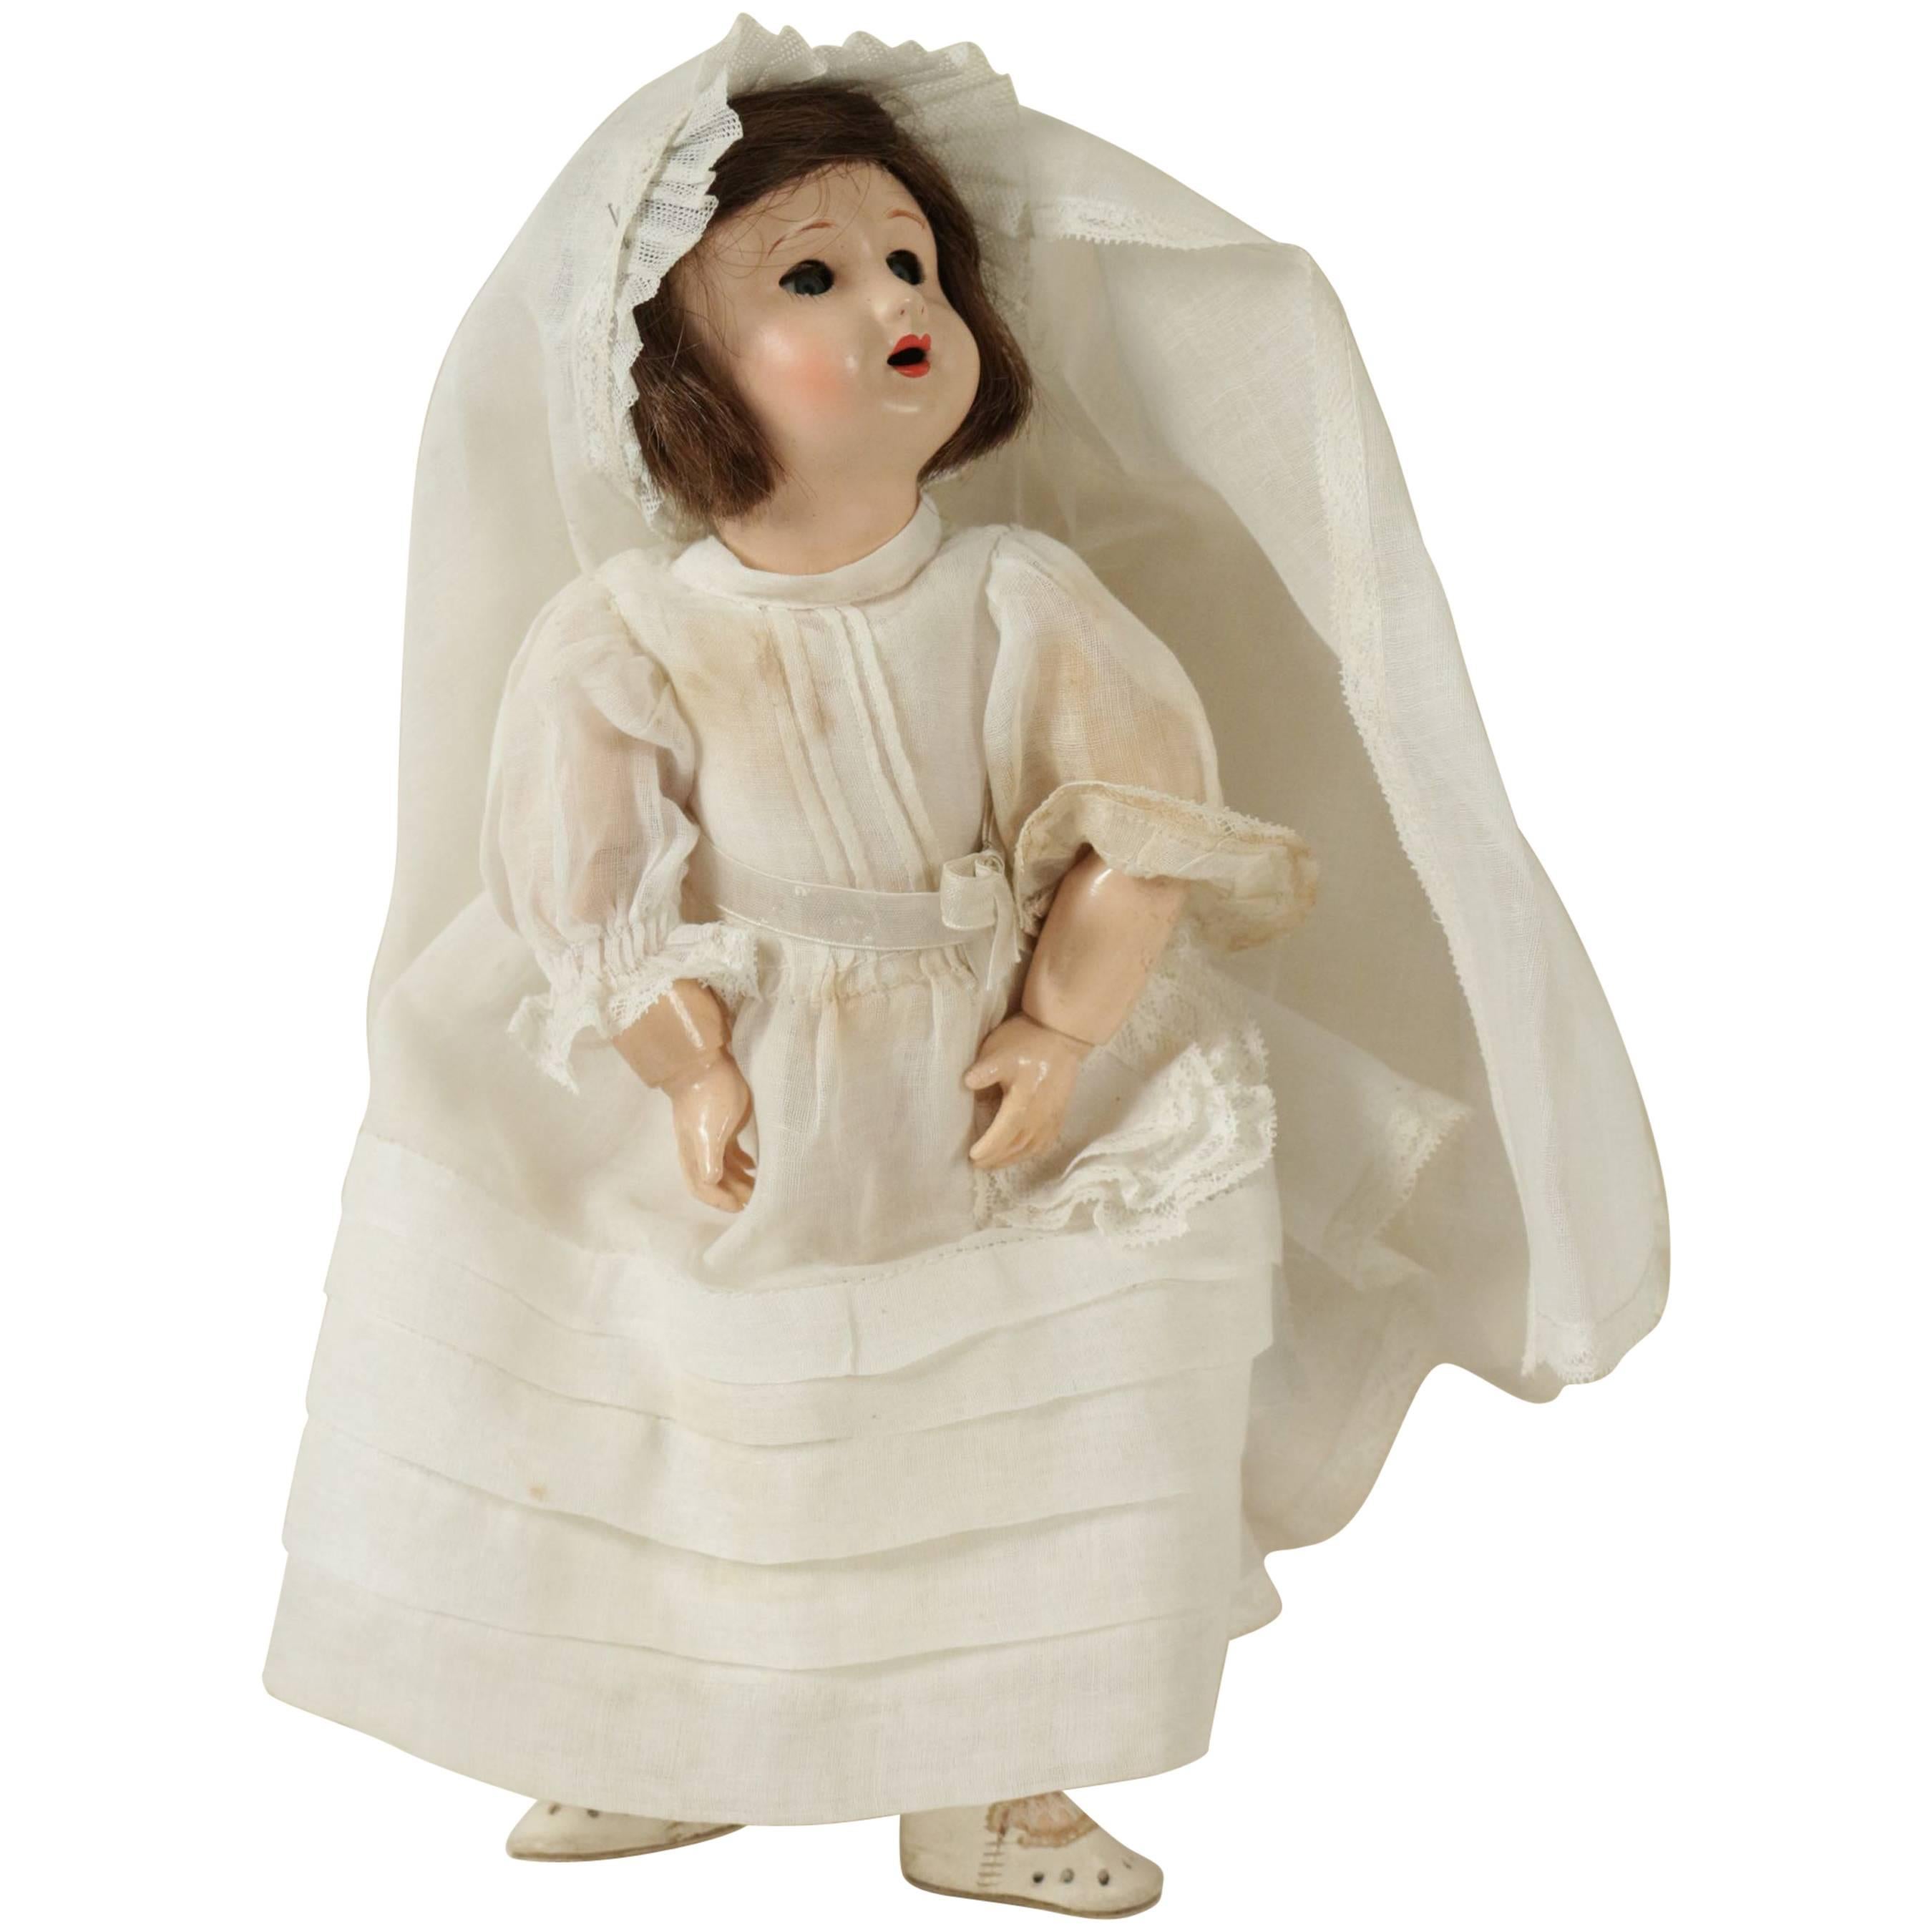 Doll from the Beginning of the 20th Century Dressed for Sunday